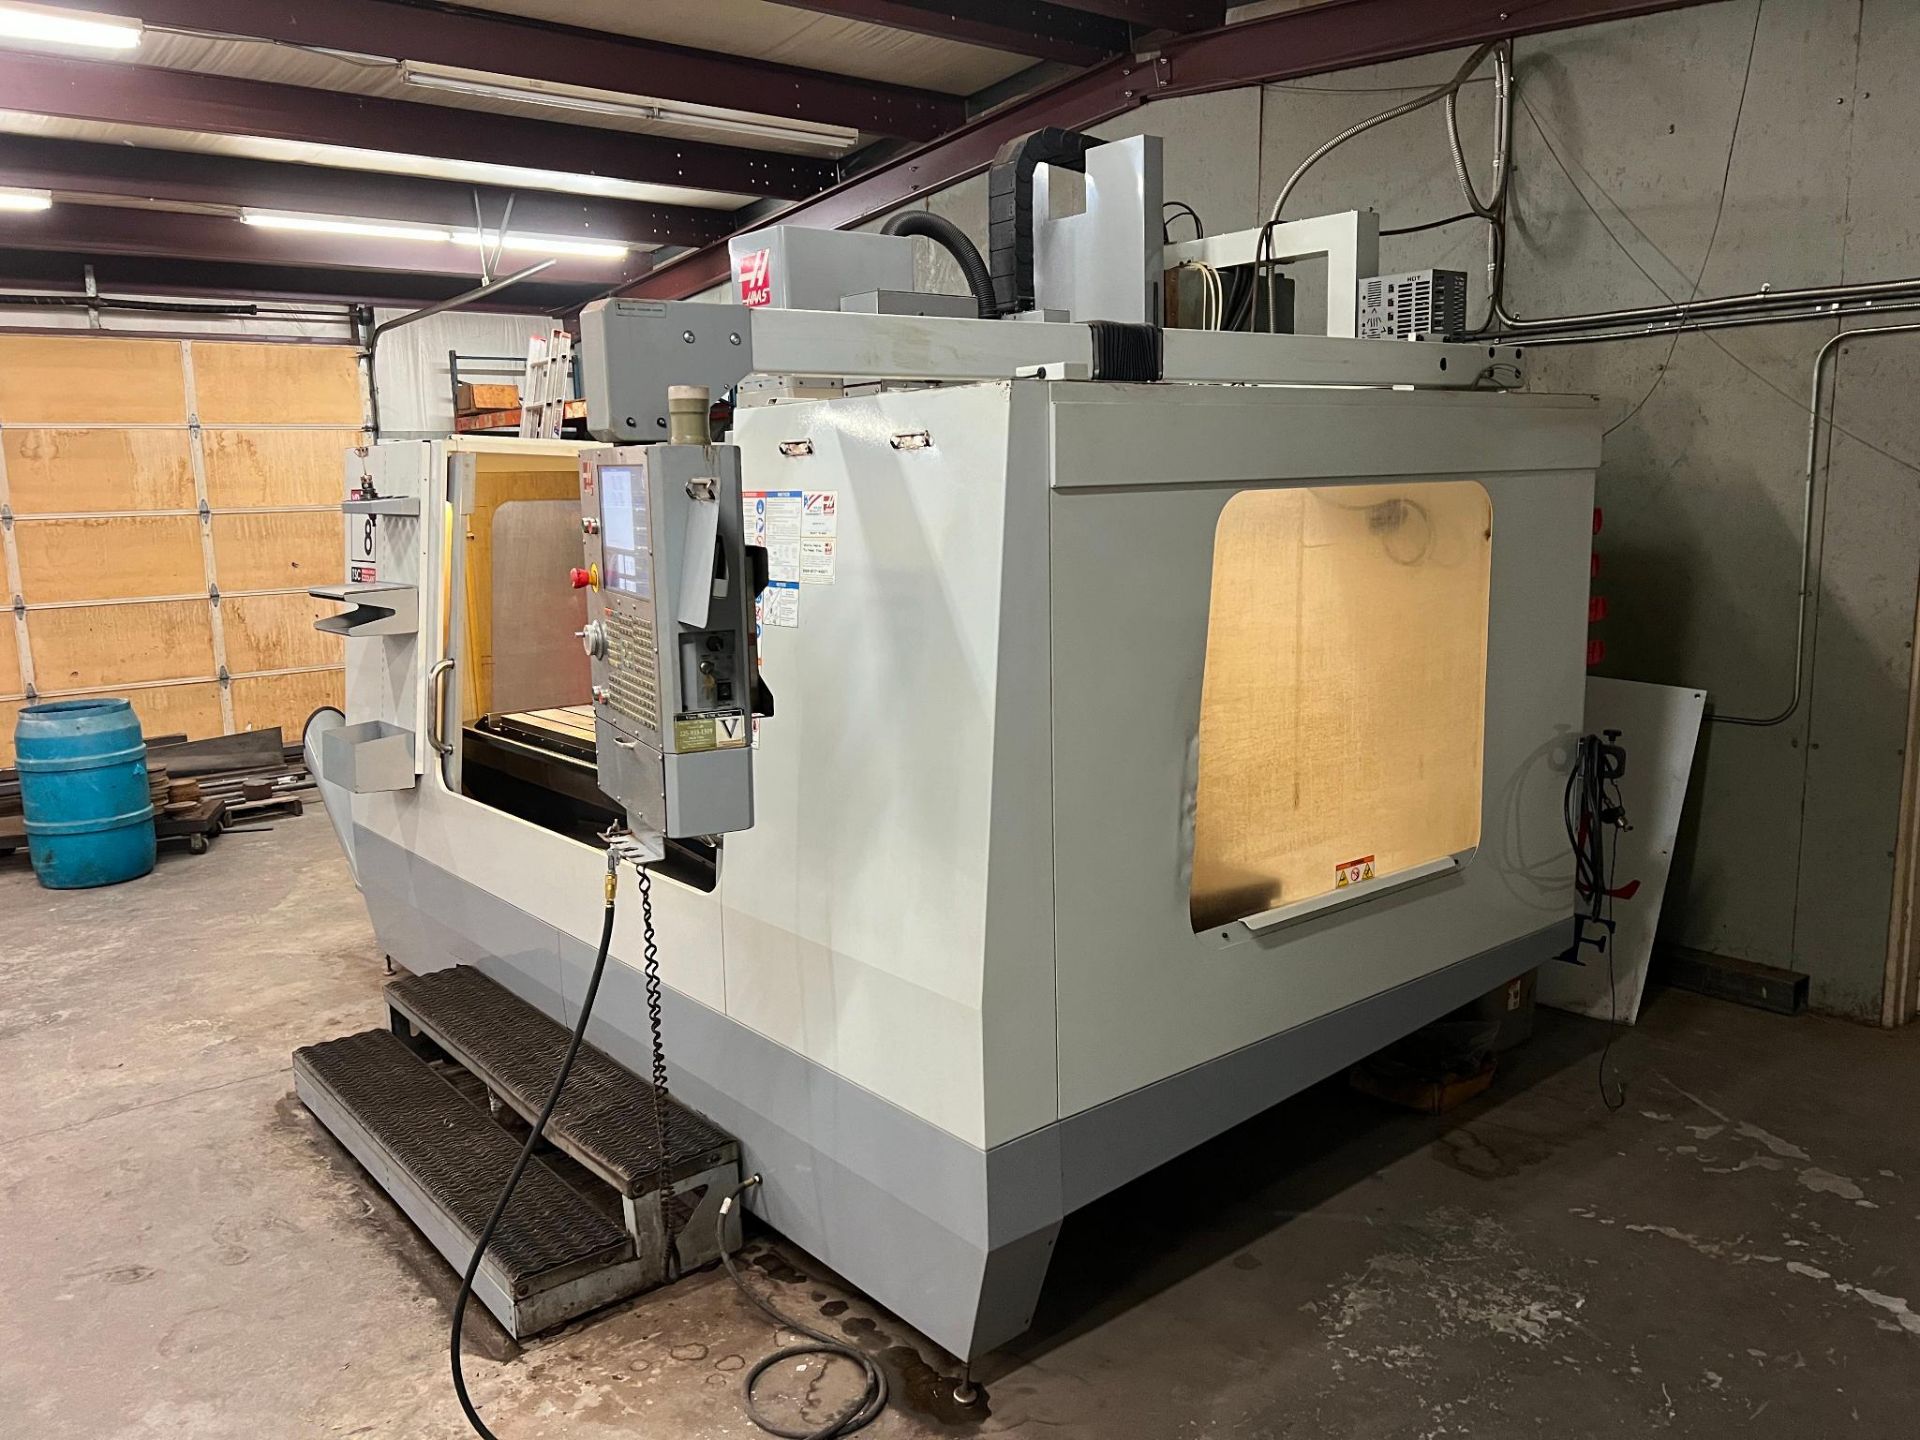 2007 Haas VR-8 5-Axis CNC Vertical Machining Center Serial Number: 1057089 X-Axis Travel: 64" Y-Axis - Image 6 of 37